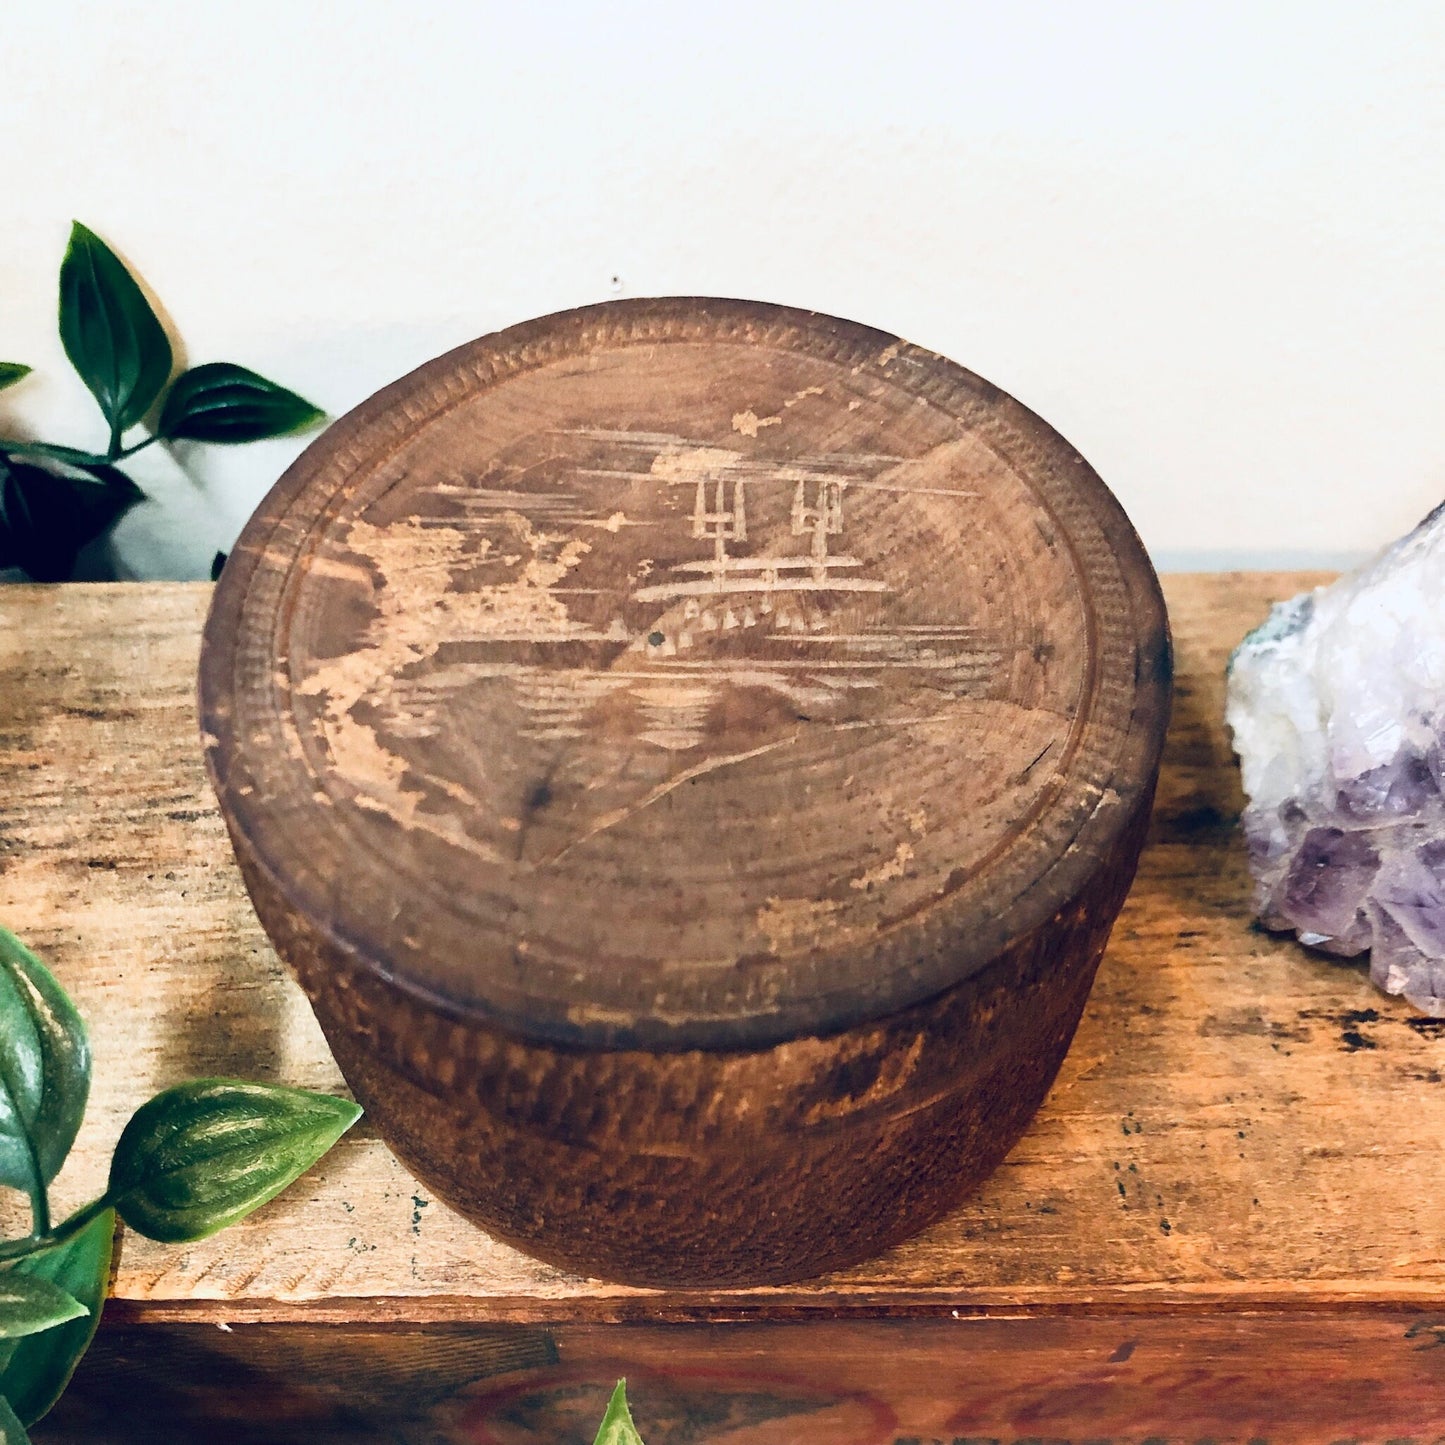 Round wooden trinket box with carved mountain landscape design, displayed on rustic wooden surface with green leaves and amethyst crystal.